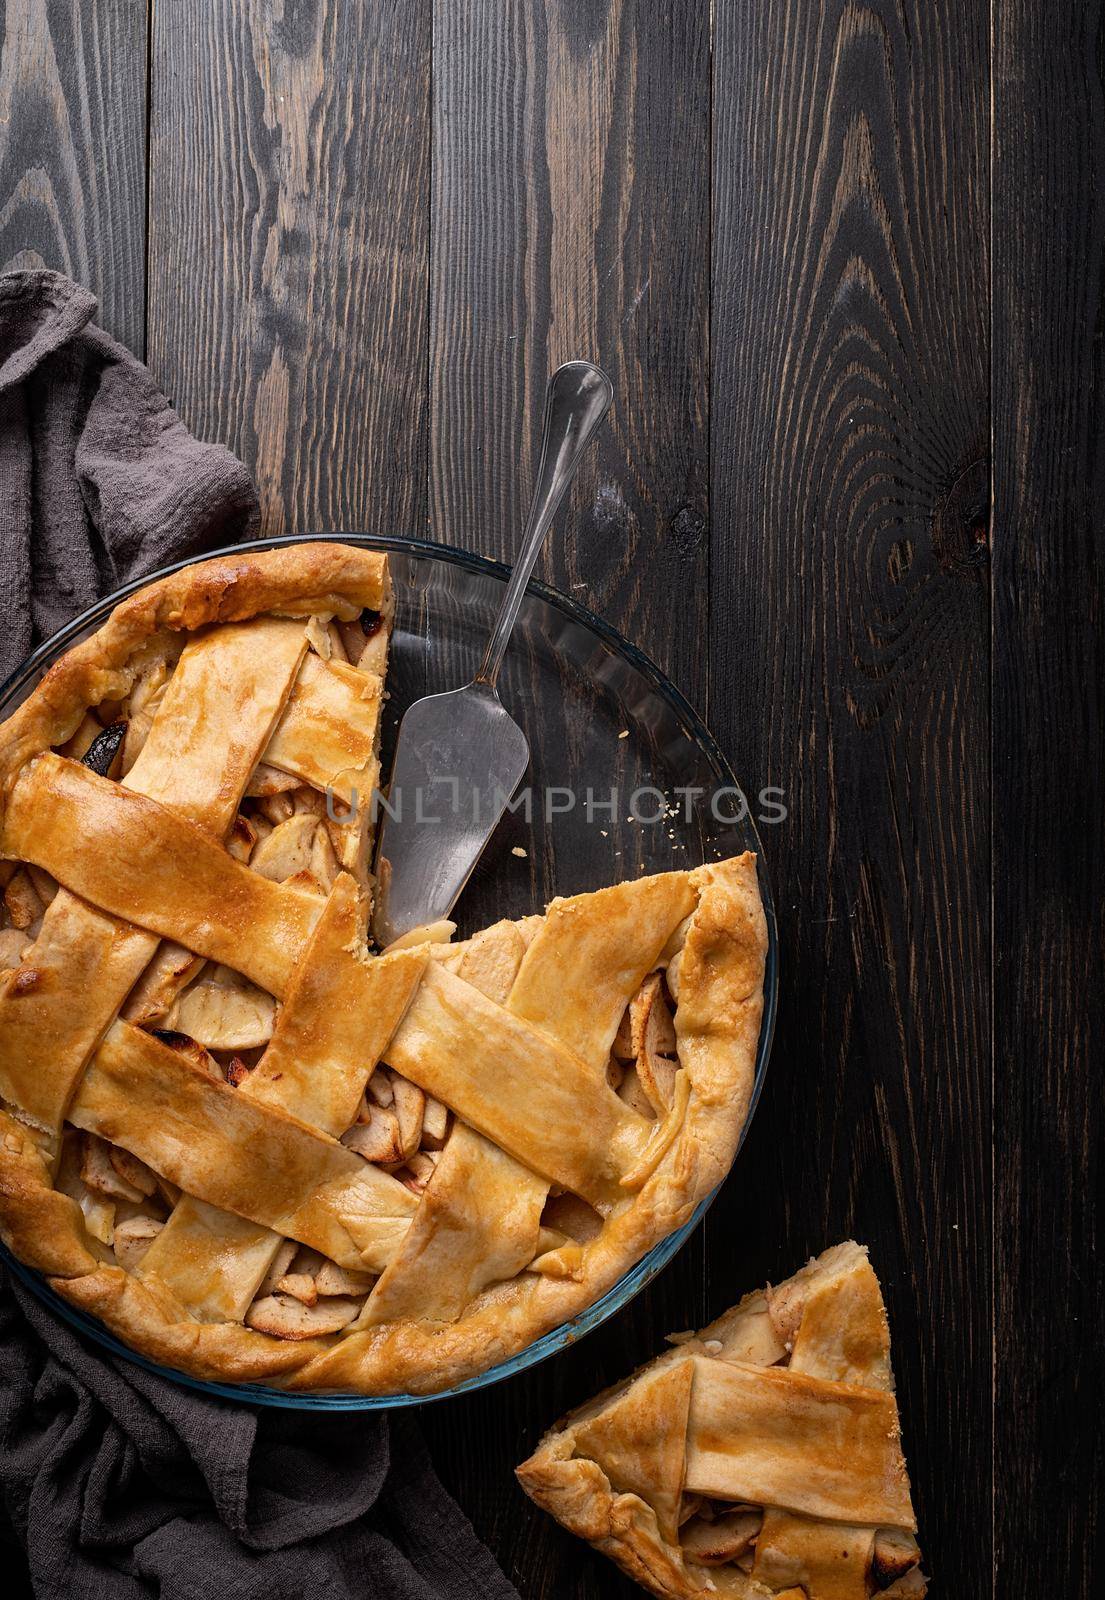 Autumn foods. Top view of homemade apple pie on dark wooden table